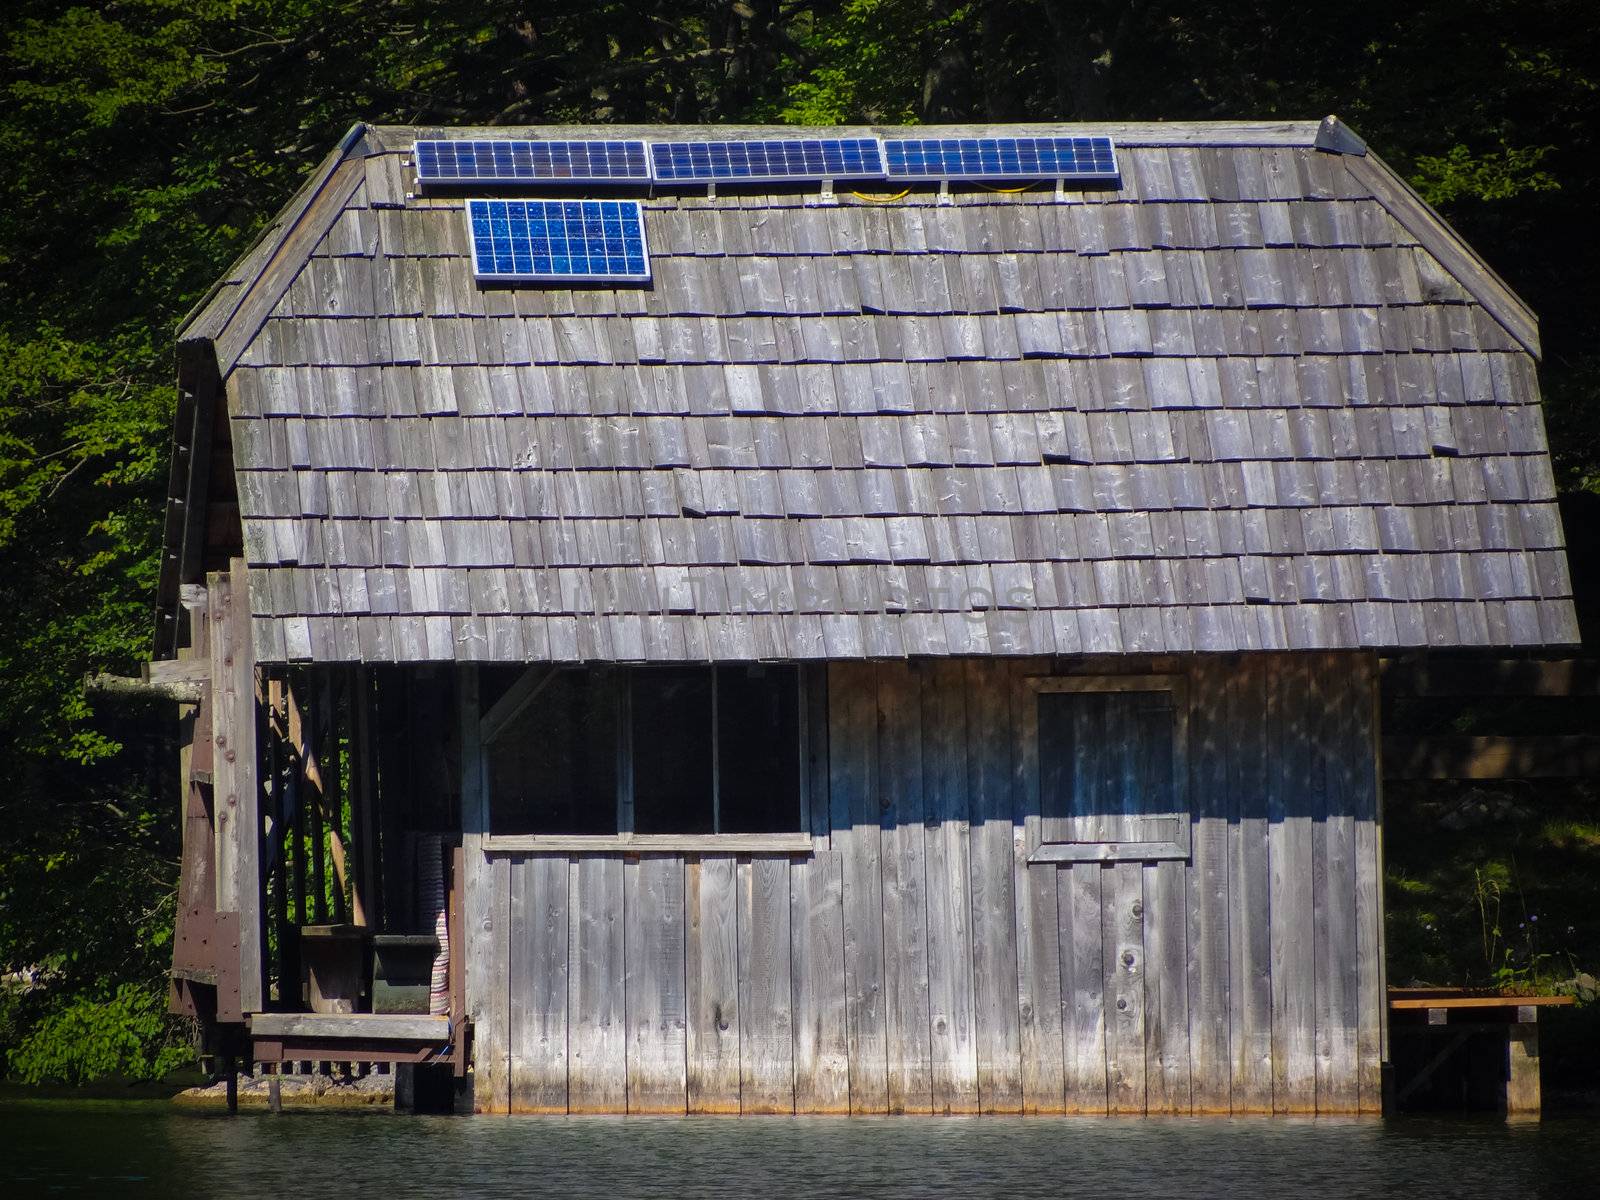 A fishing lodge with Solar array